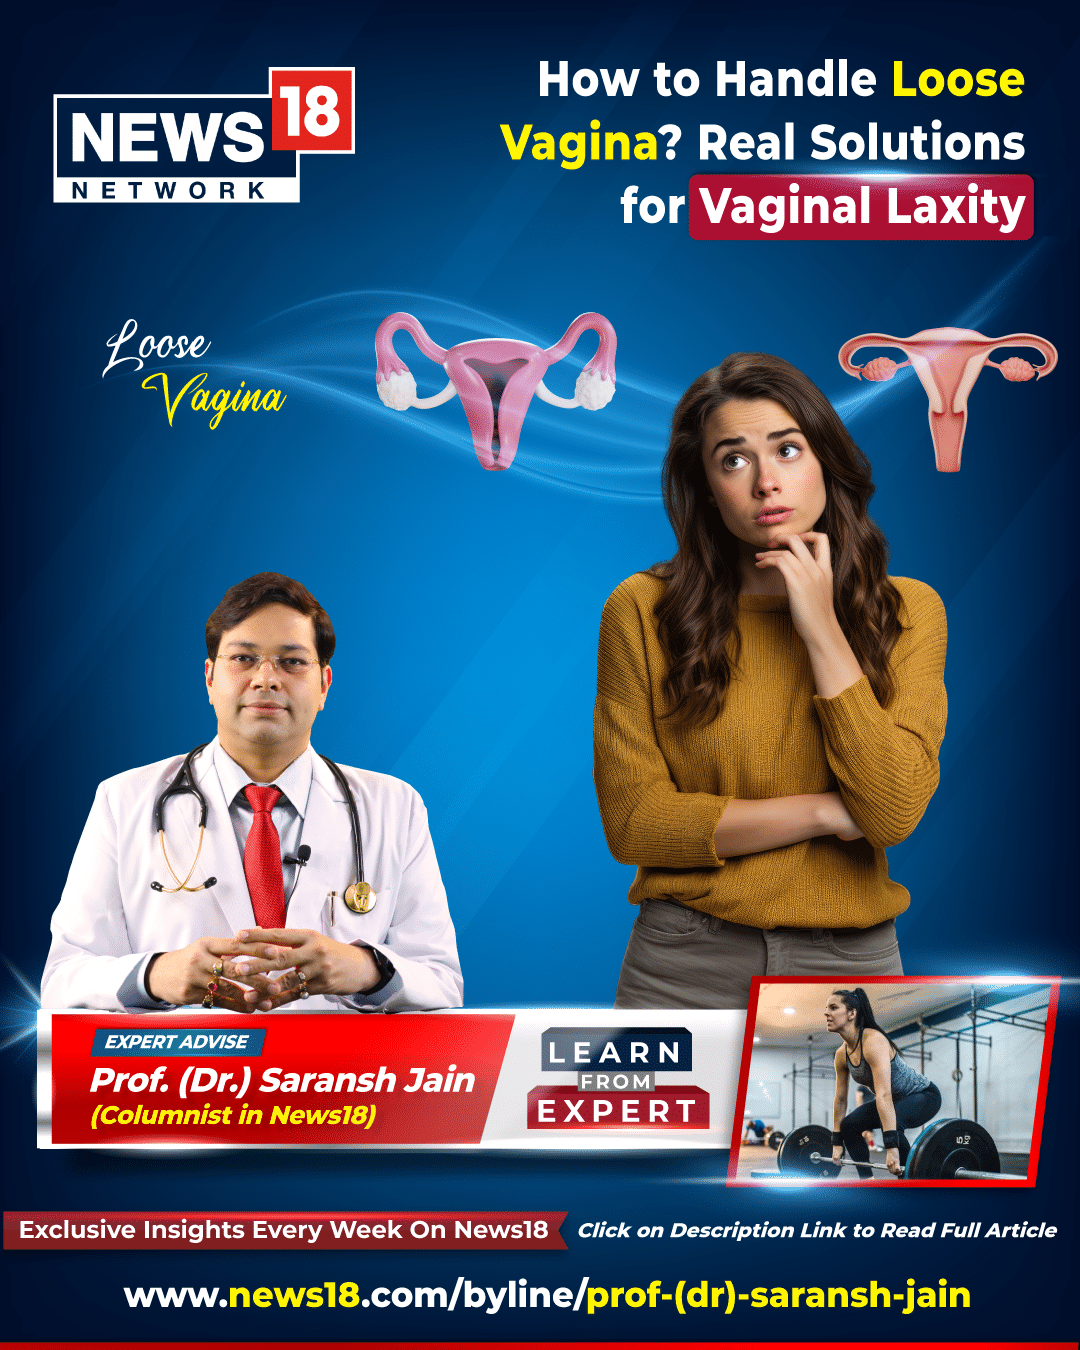 How to Handle a Loose Vagina? Real Solutions for Vaginal Laxity